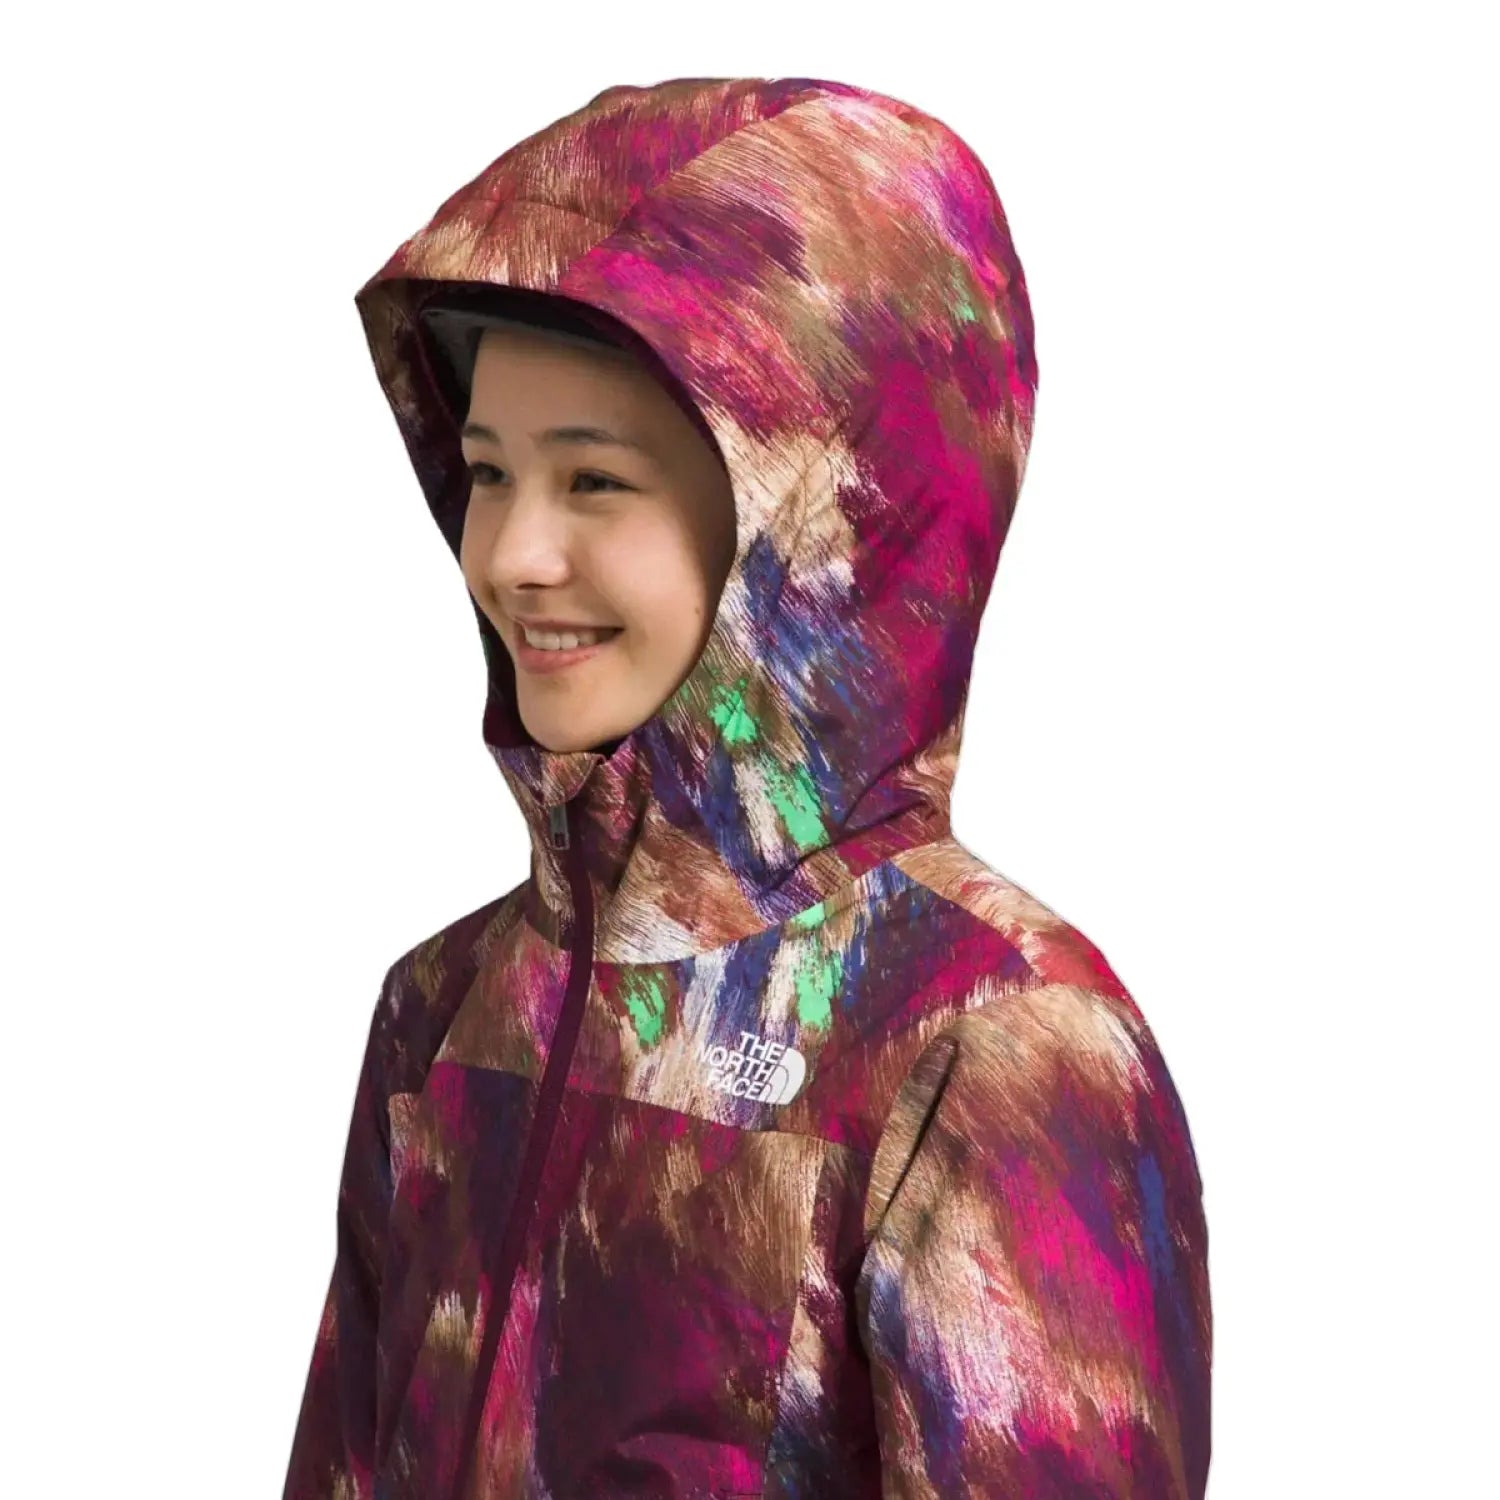 The North Face Girl's Freedom Insulated Jacket shown in Boysenberry Paint. Hood view on model.